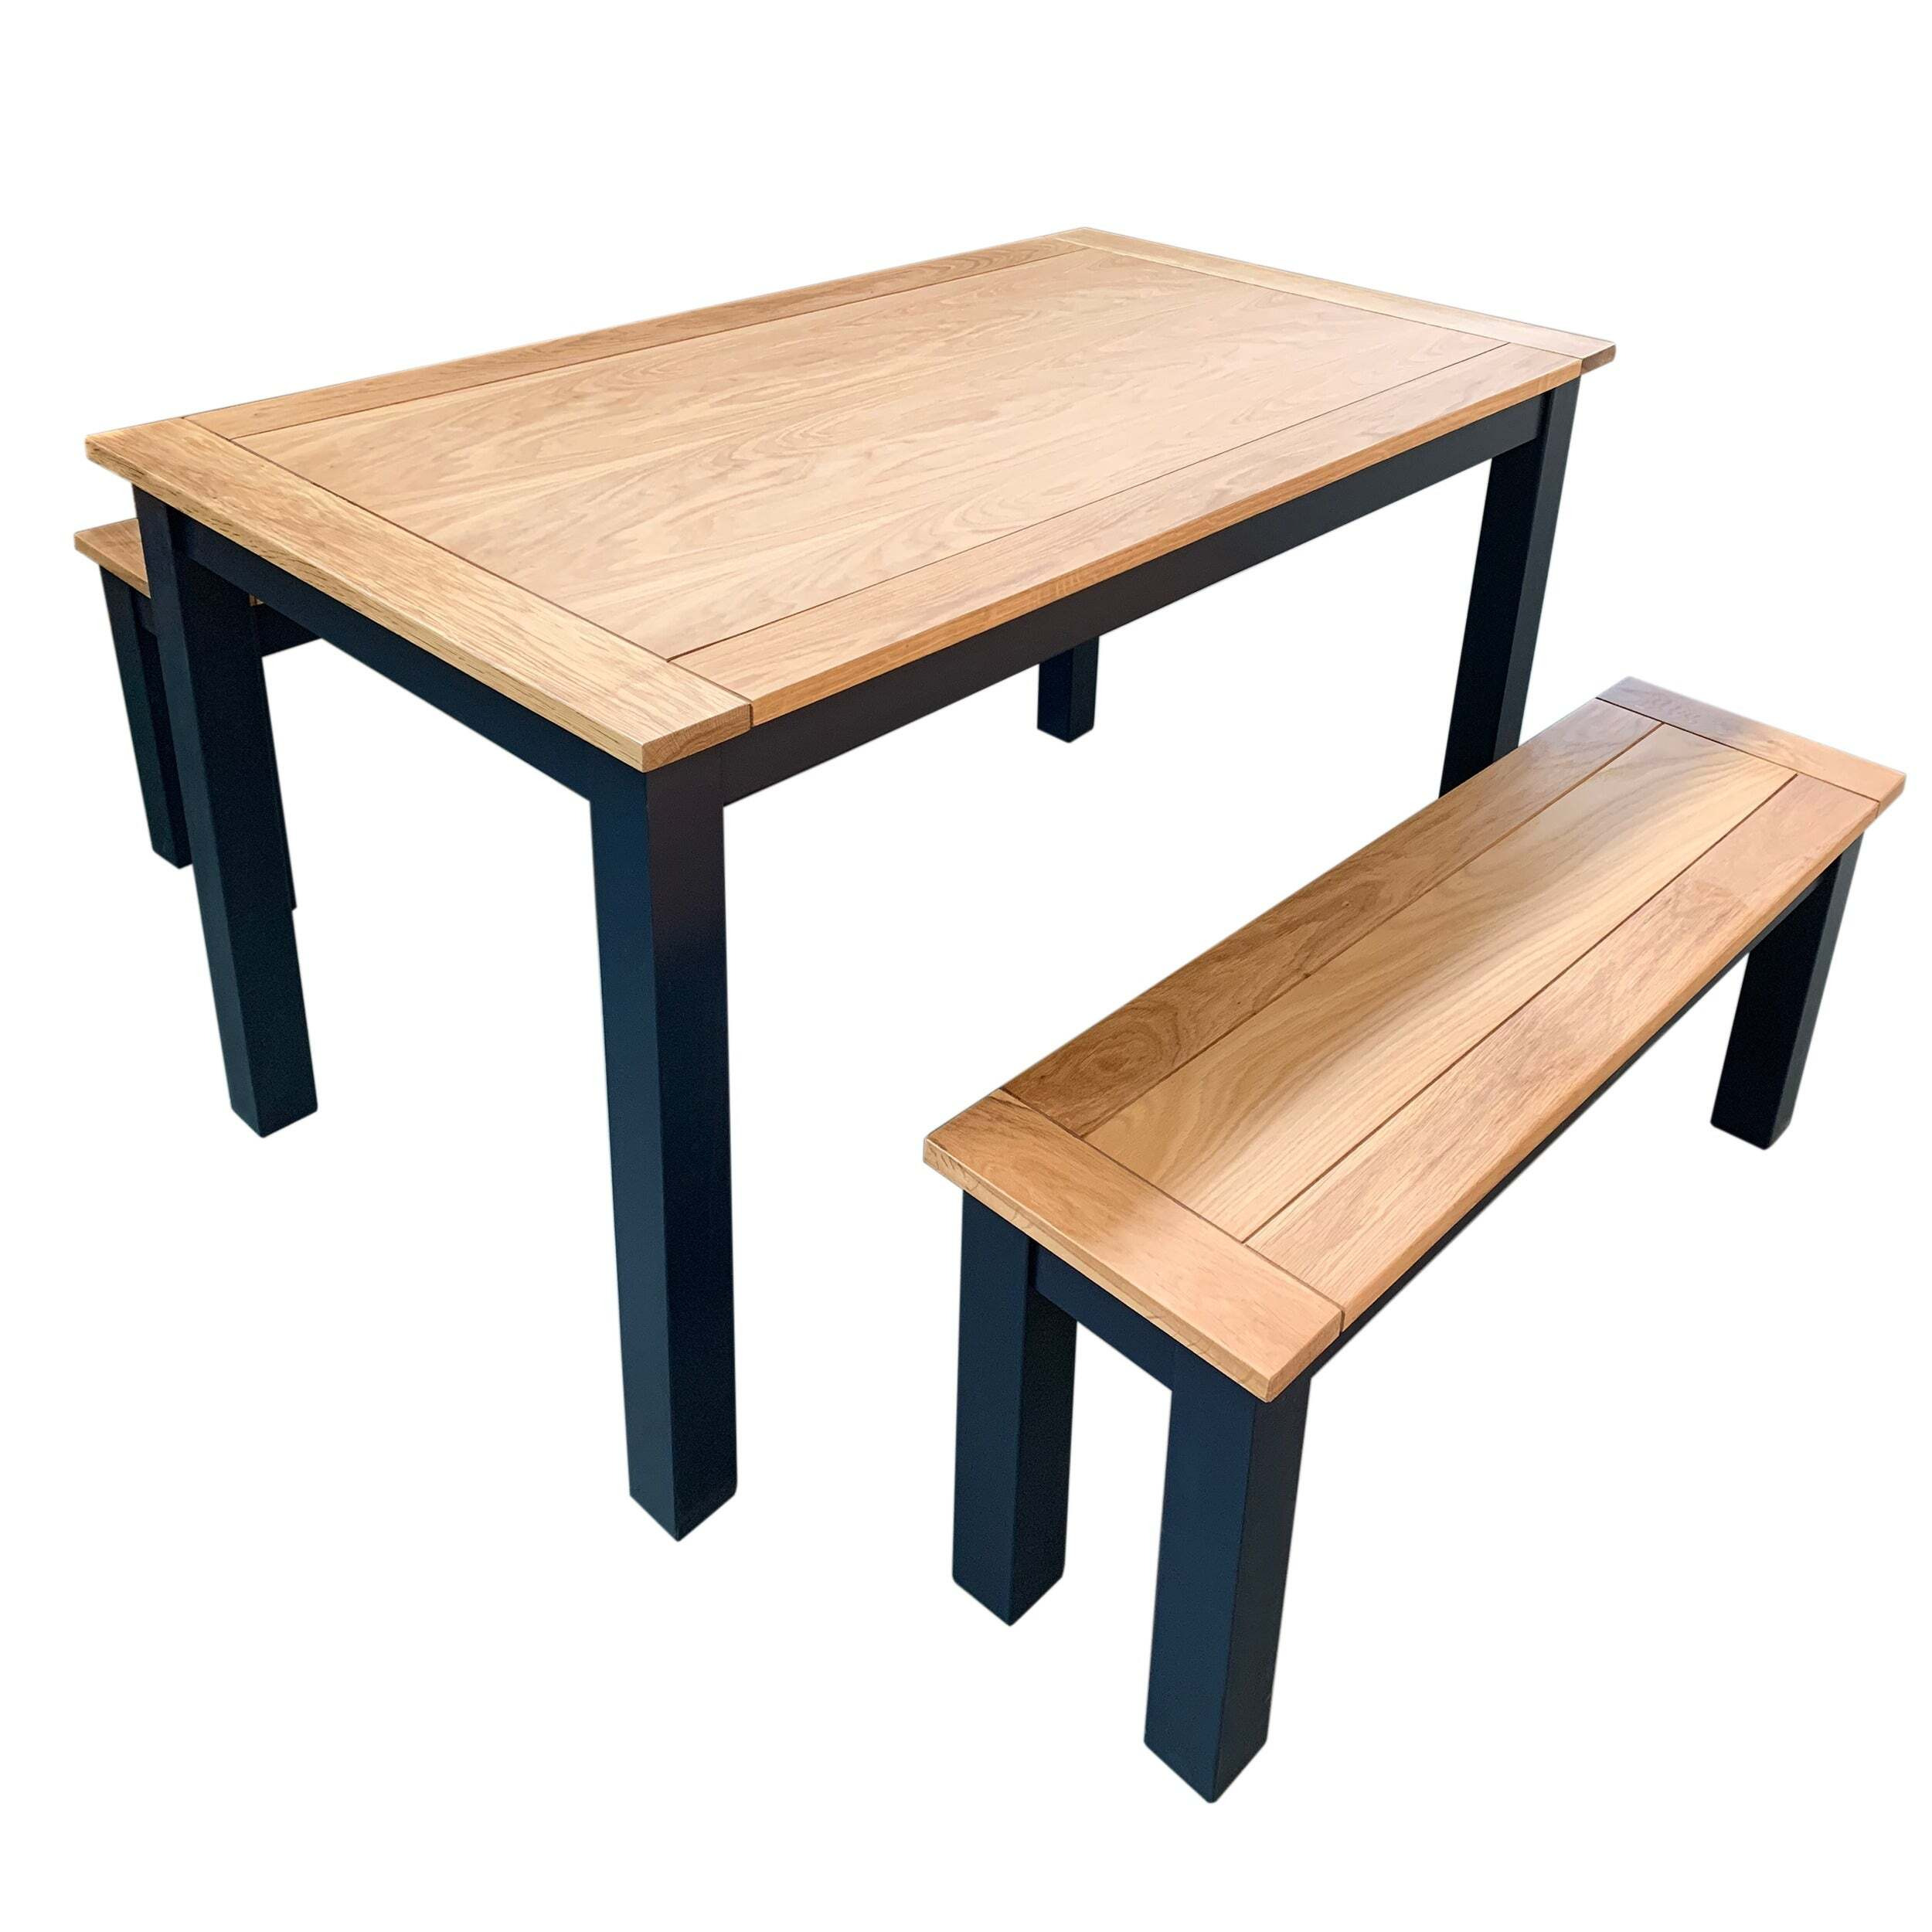 Clifford Rectangular Dining Table with 2 Benches, Pine Navy